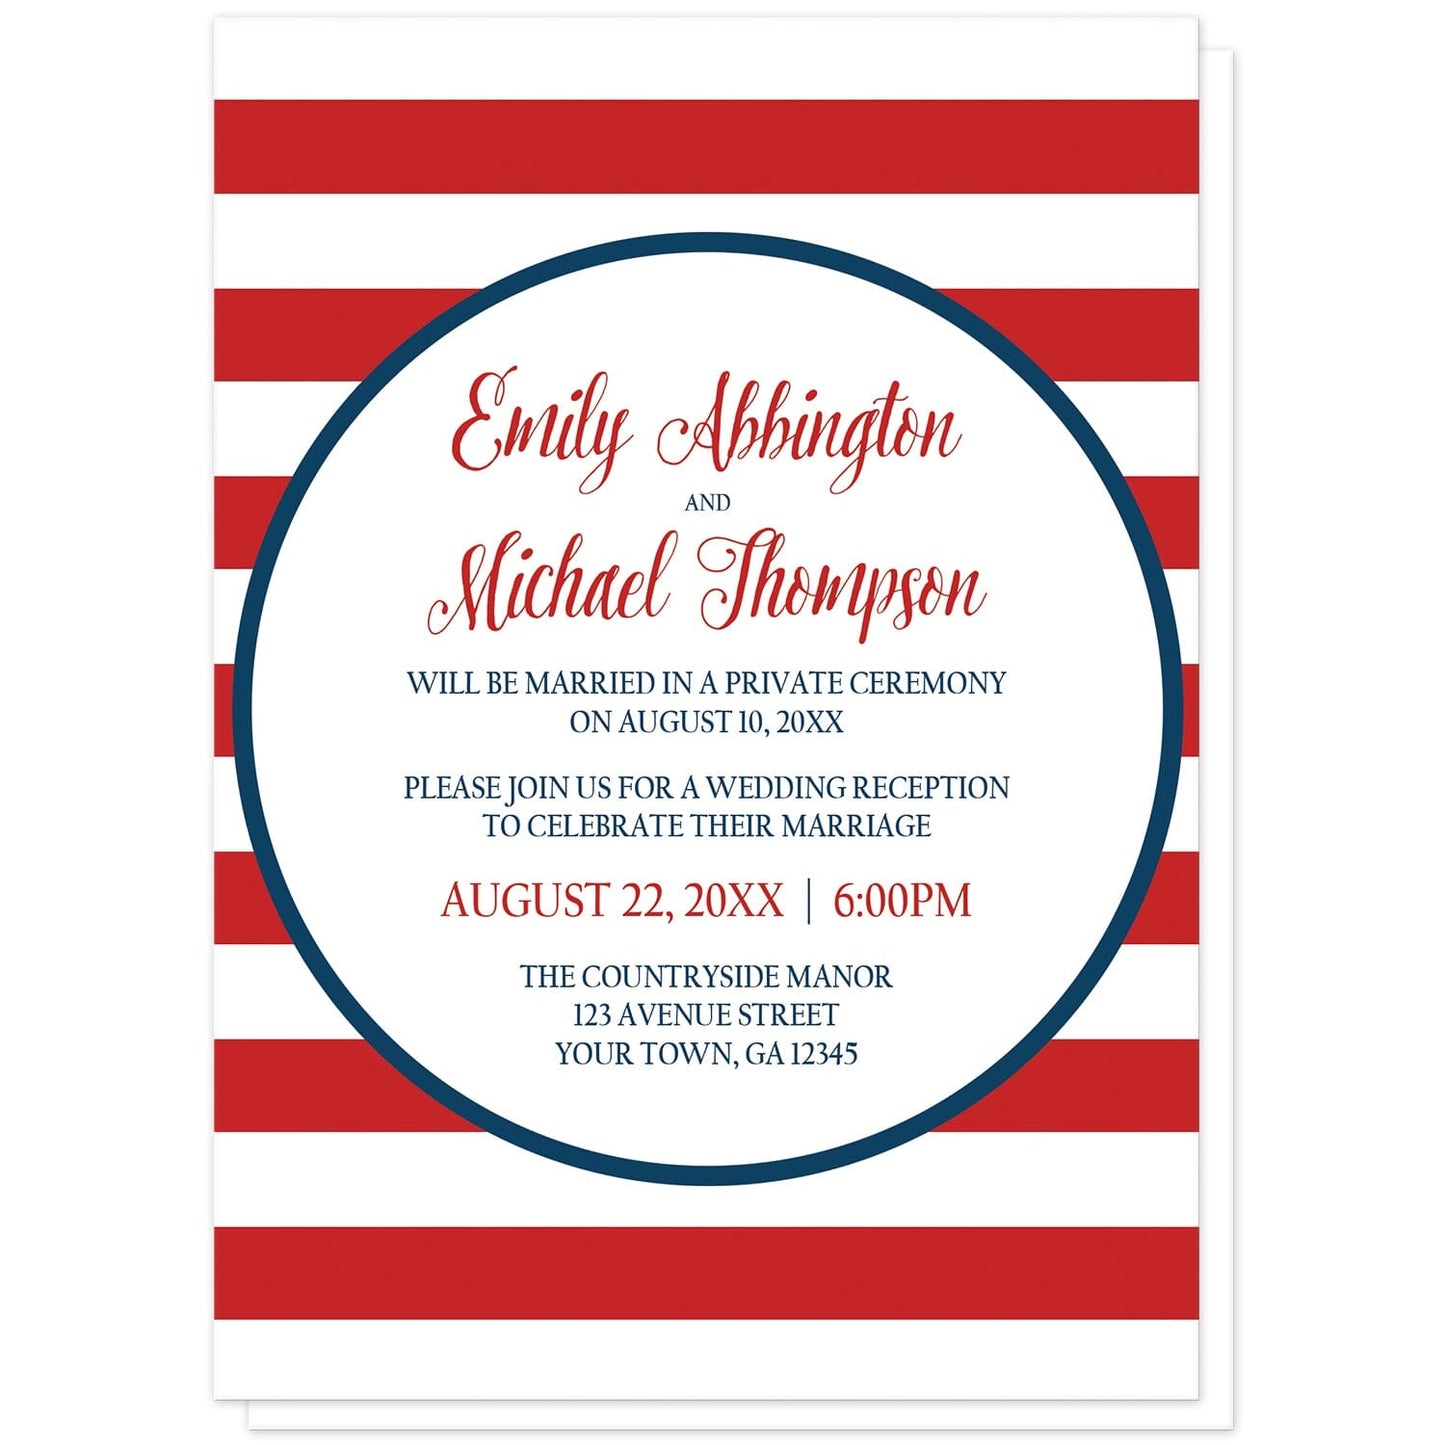 Navy Circle Red Stripe Nautical Reception Only Invitations at Artistically Invited. Navy circle red stripe nautical reception only invitations with your personalized post-wedding reception details custom printed in blue and red inside a white circle outlined in navy blue, over a red and white stripes pattern background. 